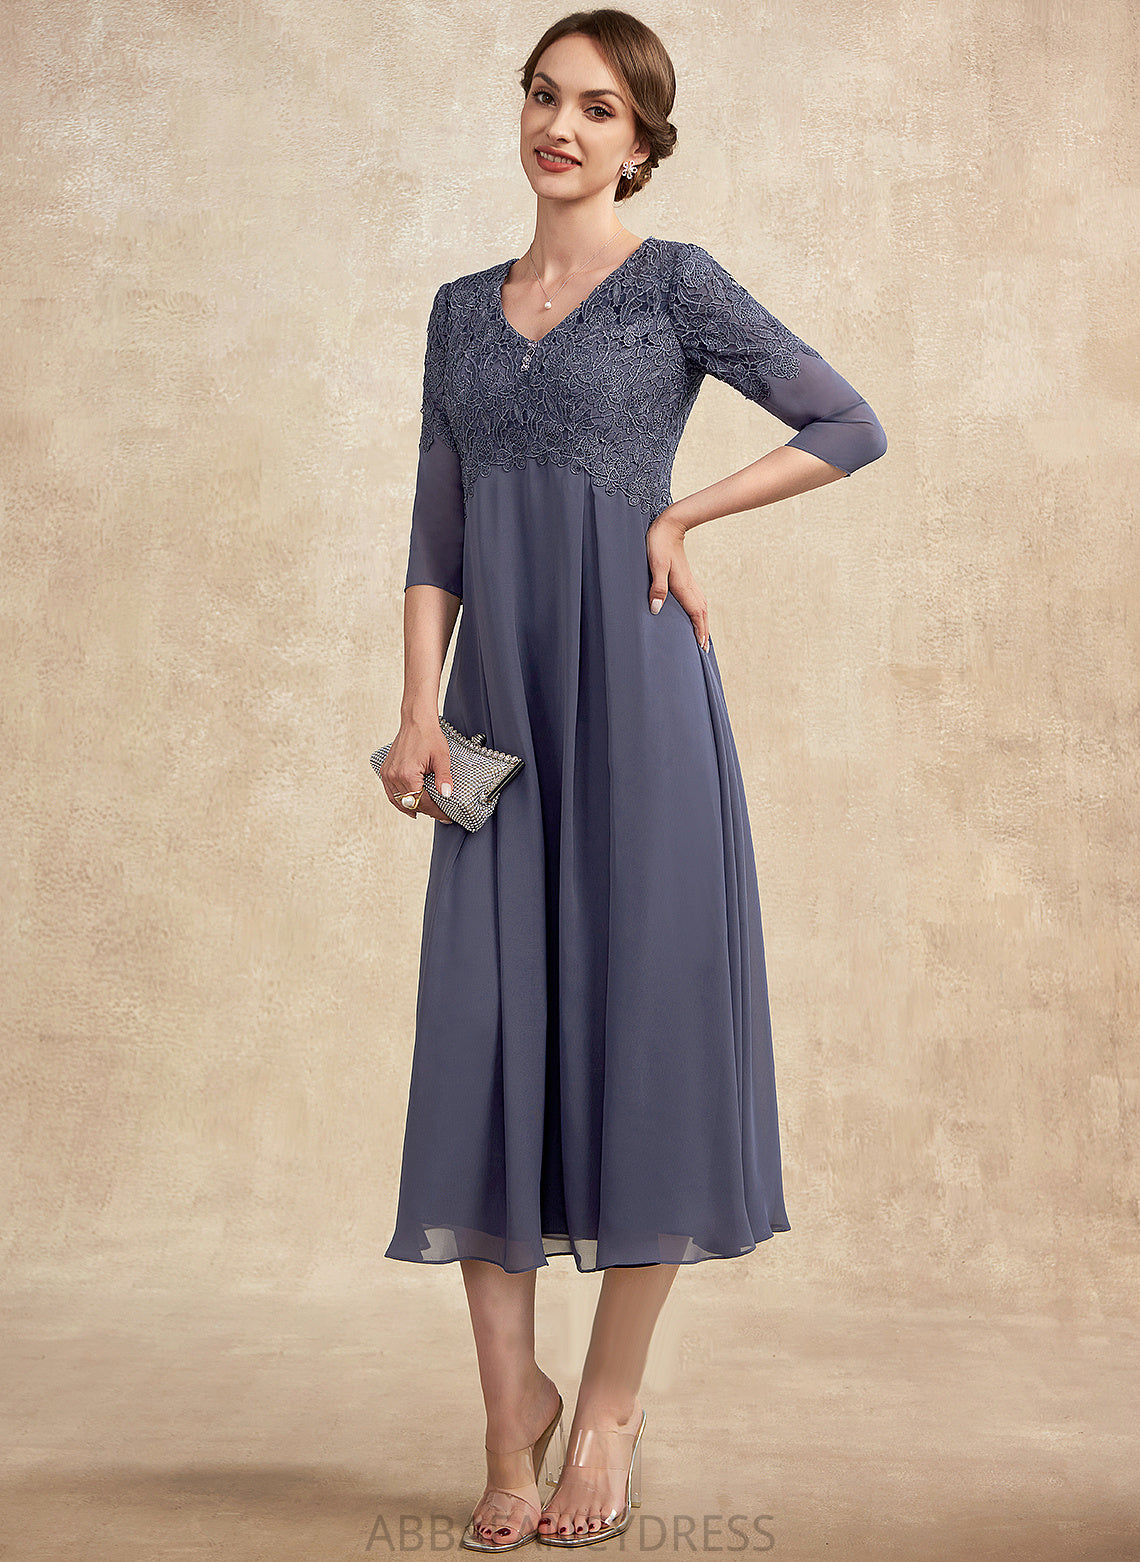 With Tea-Length Mother Dress Lace Mother of the Bride Dresses of Beading Chiffon V-neck Bride the Frederica A-Line